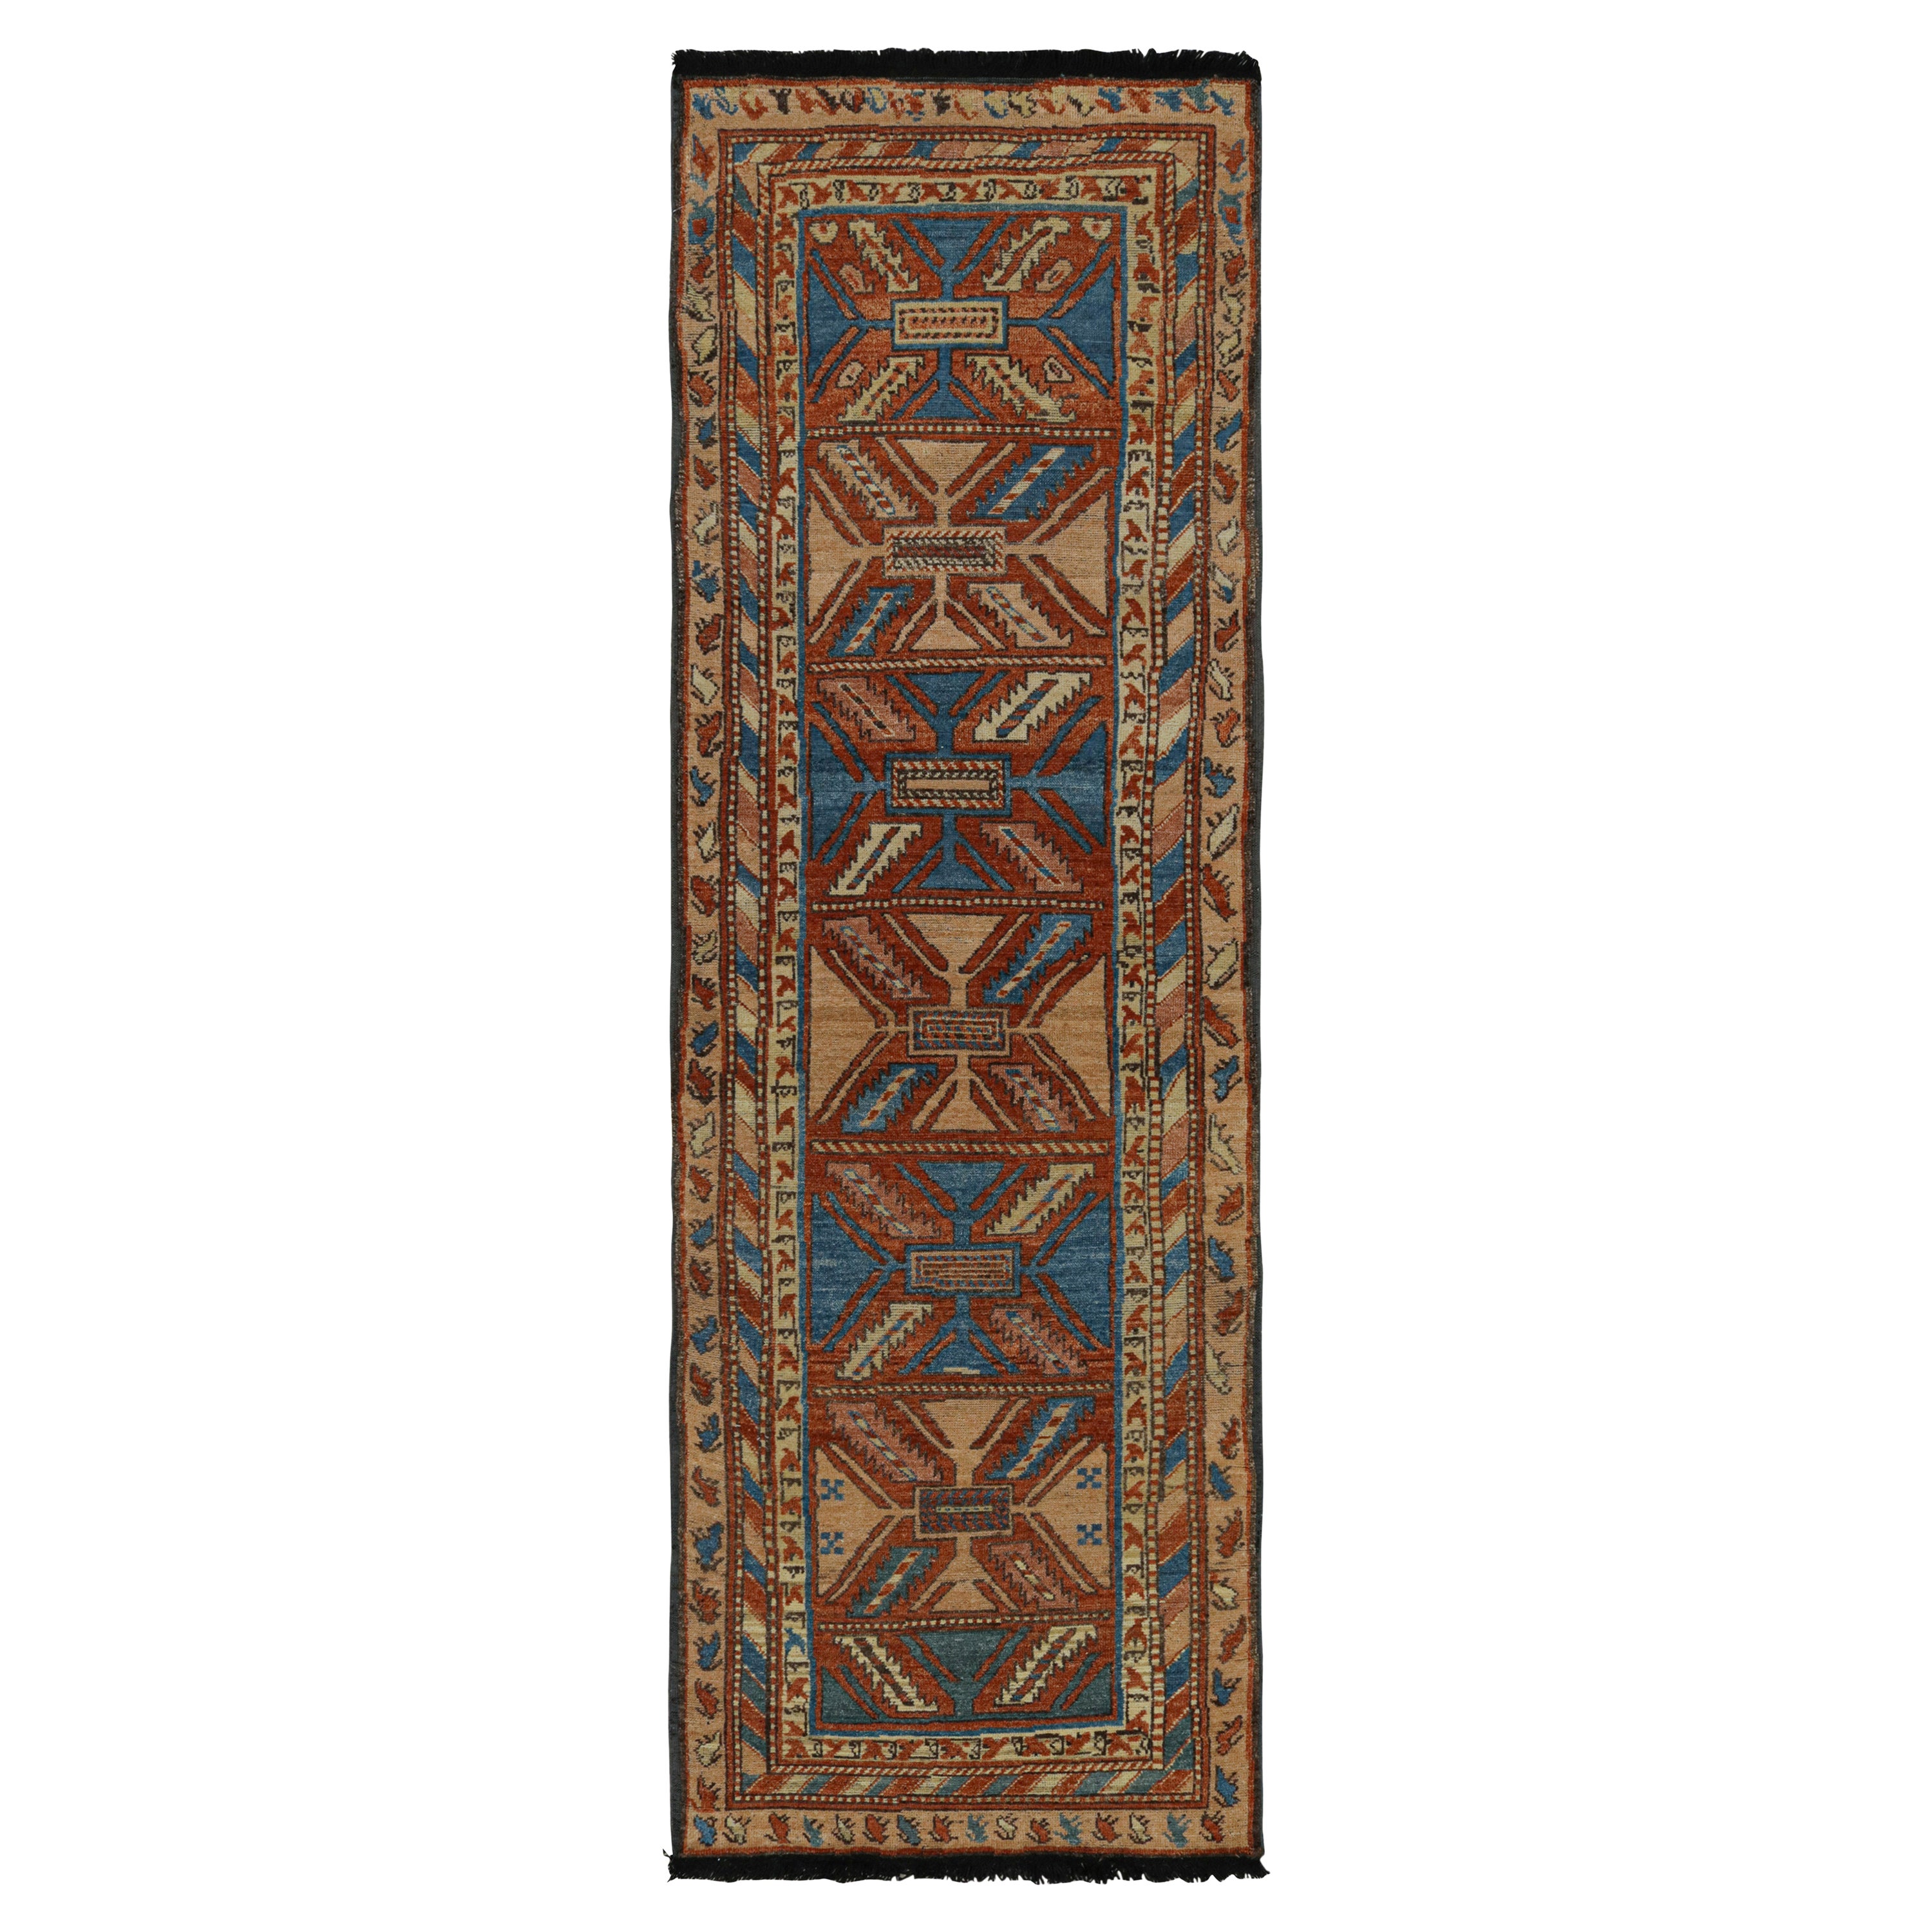 Rug & Kilim’s Tribal Style Runner Rug in Beige, Red and Blue Geometric Patterns For Sale